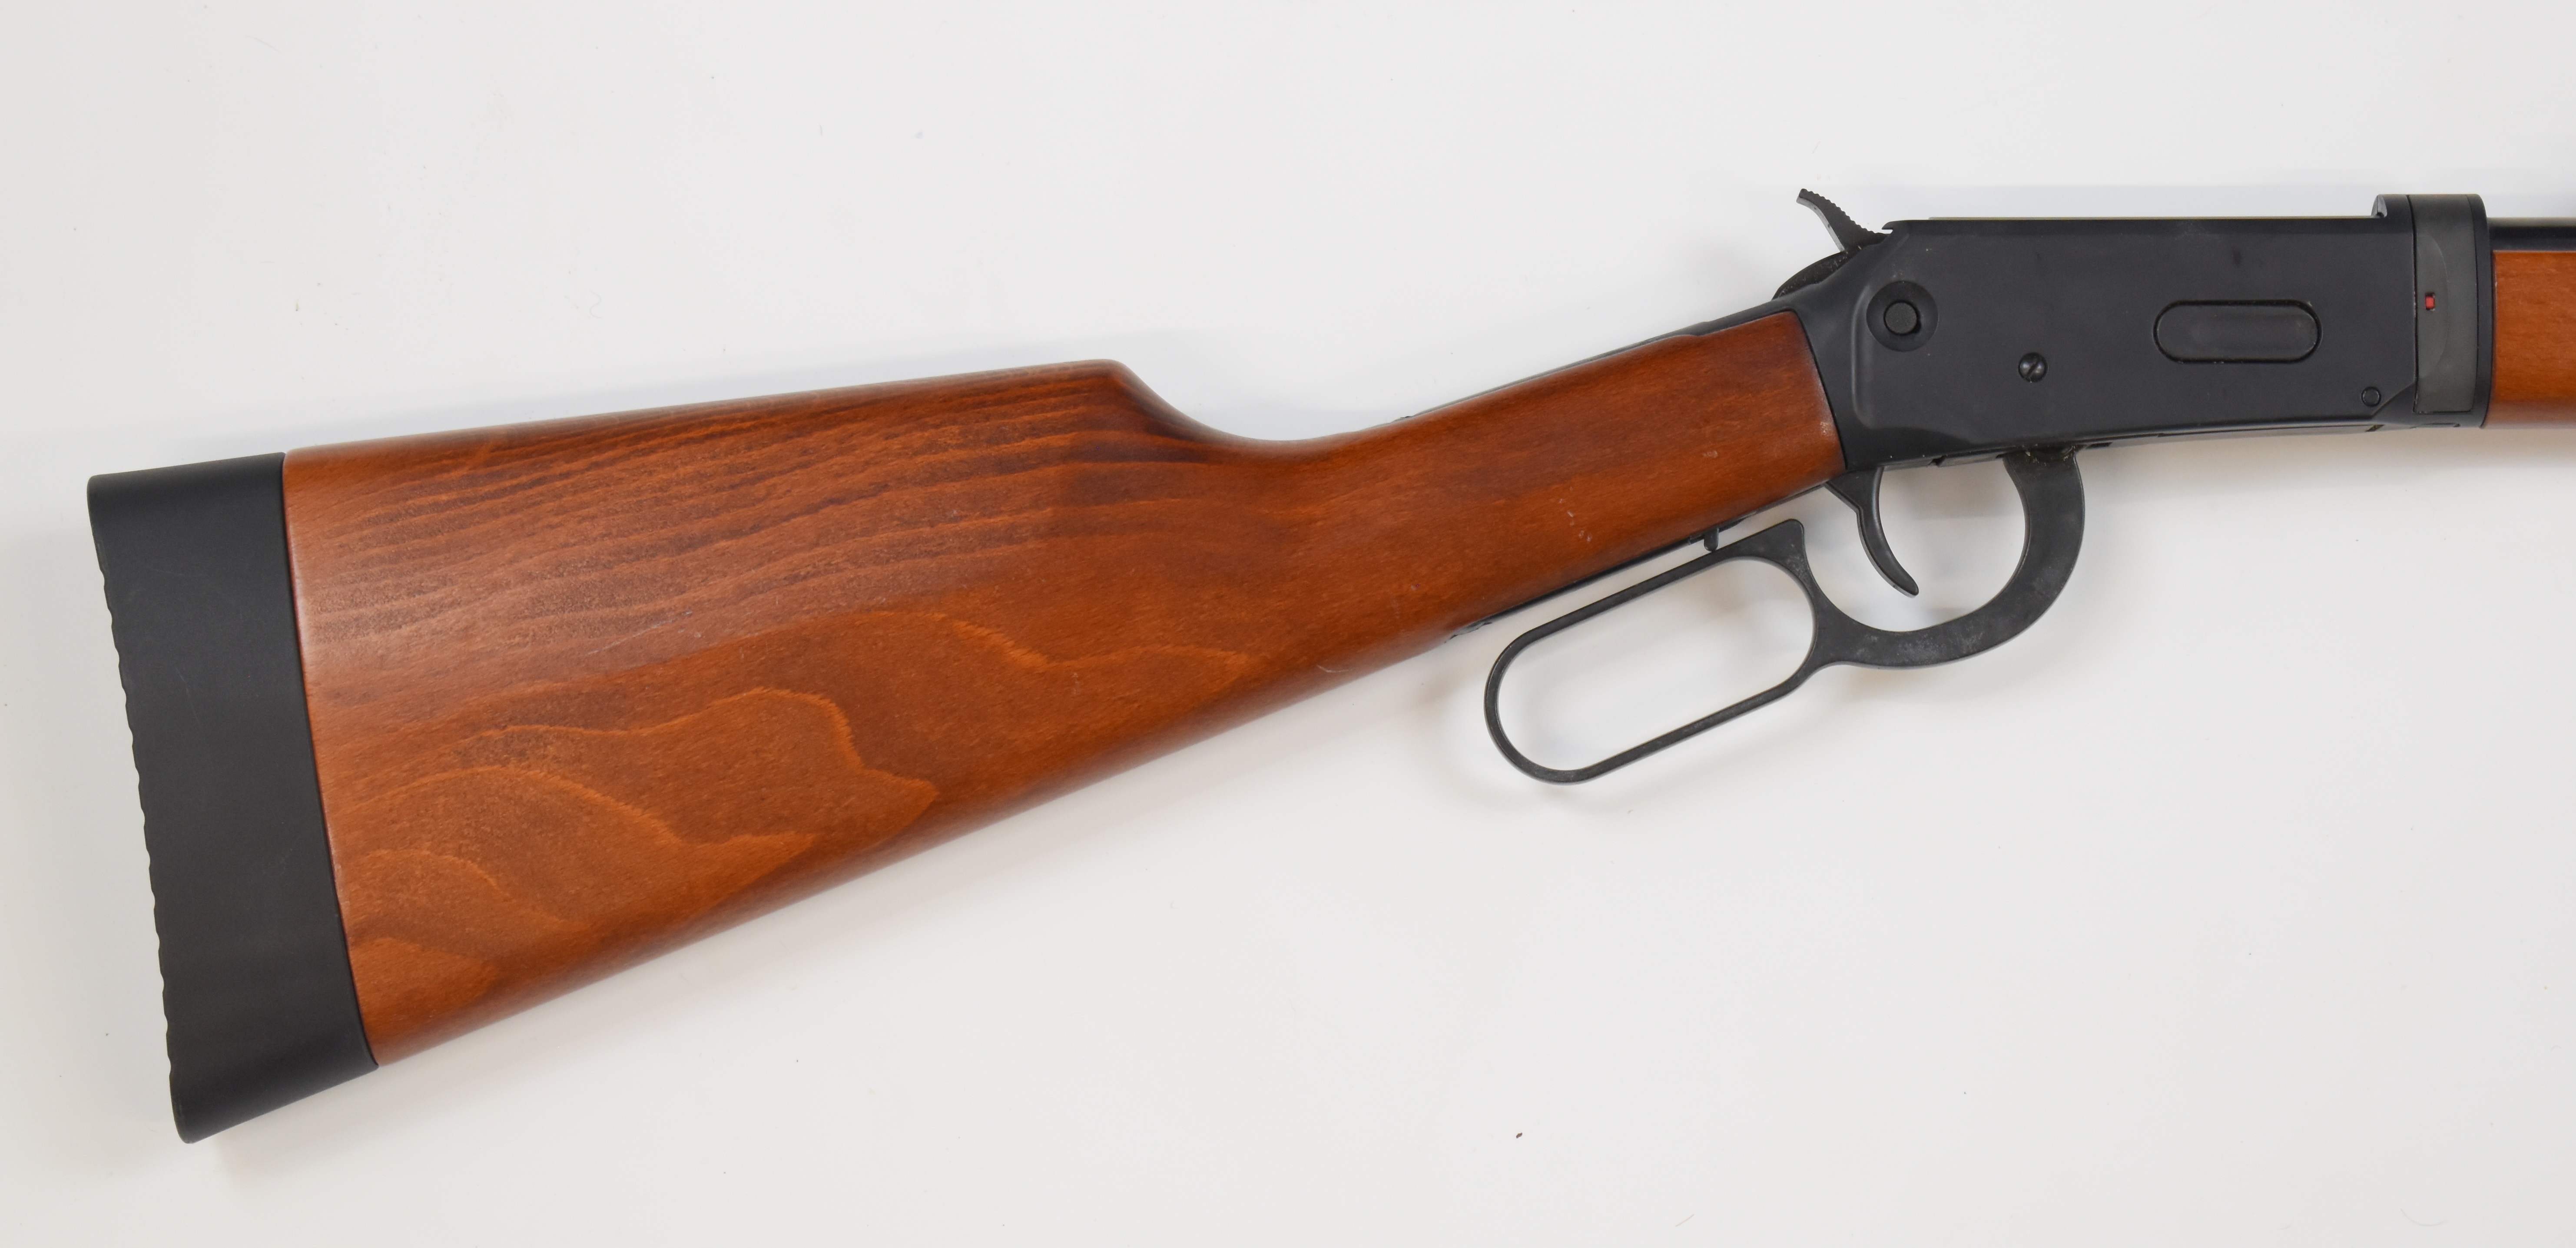 Walther Winchester style lever-action .177 CO2 carbine air rifle with two 8 shot magazines, - Image 3 of 11